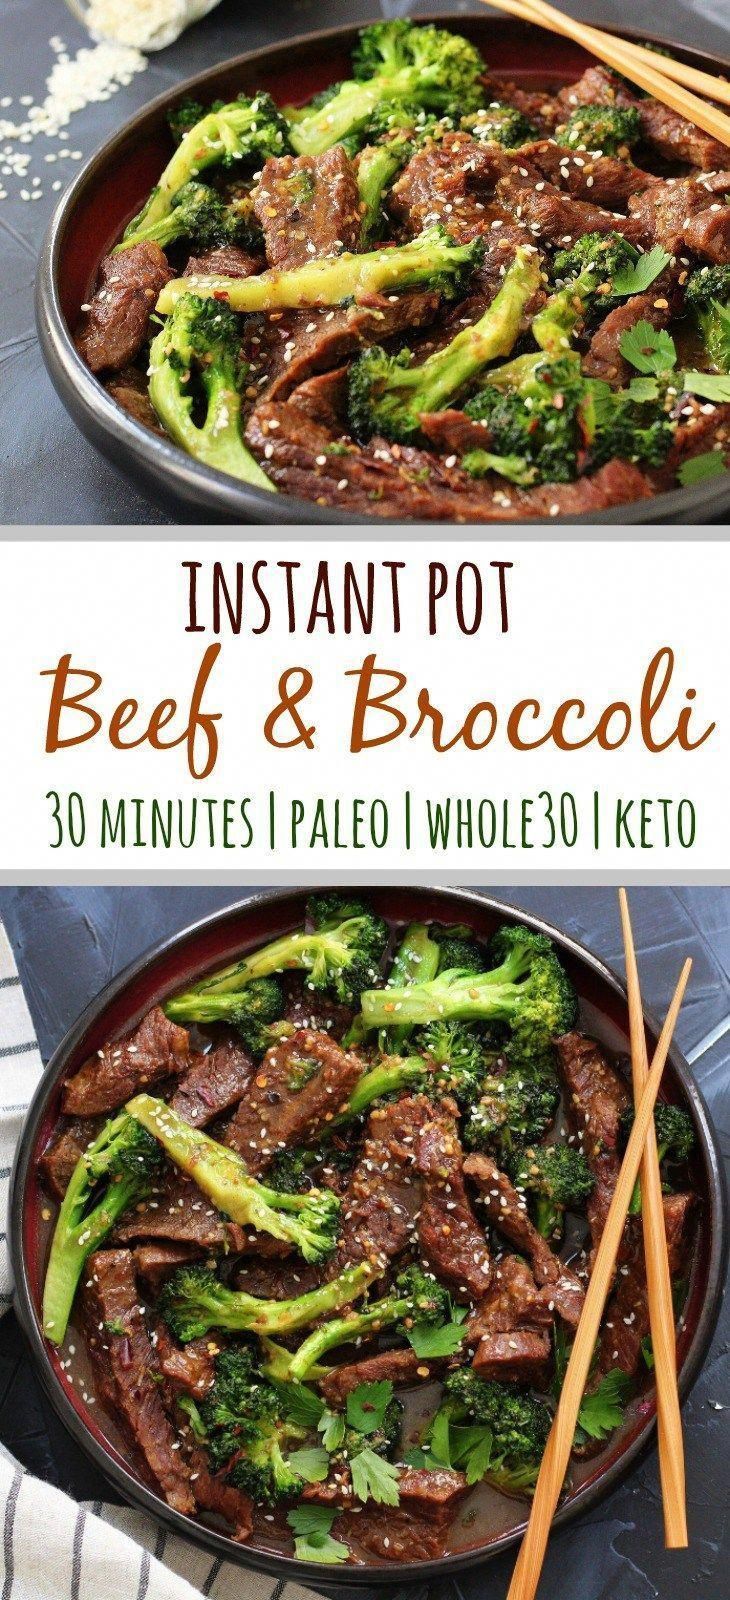 Instant Pot Beef and Broccoli: Whole30, Paleo and 30 Minutes! - Whole Kitchen Sink -   17 instant pot recipes healthy family dinners beef ideas